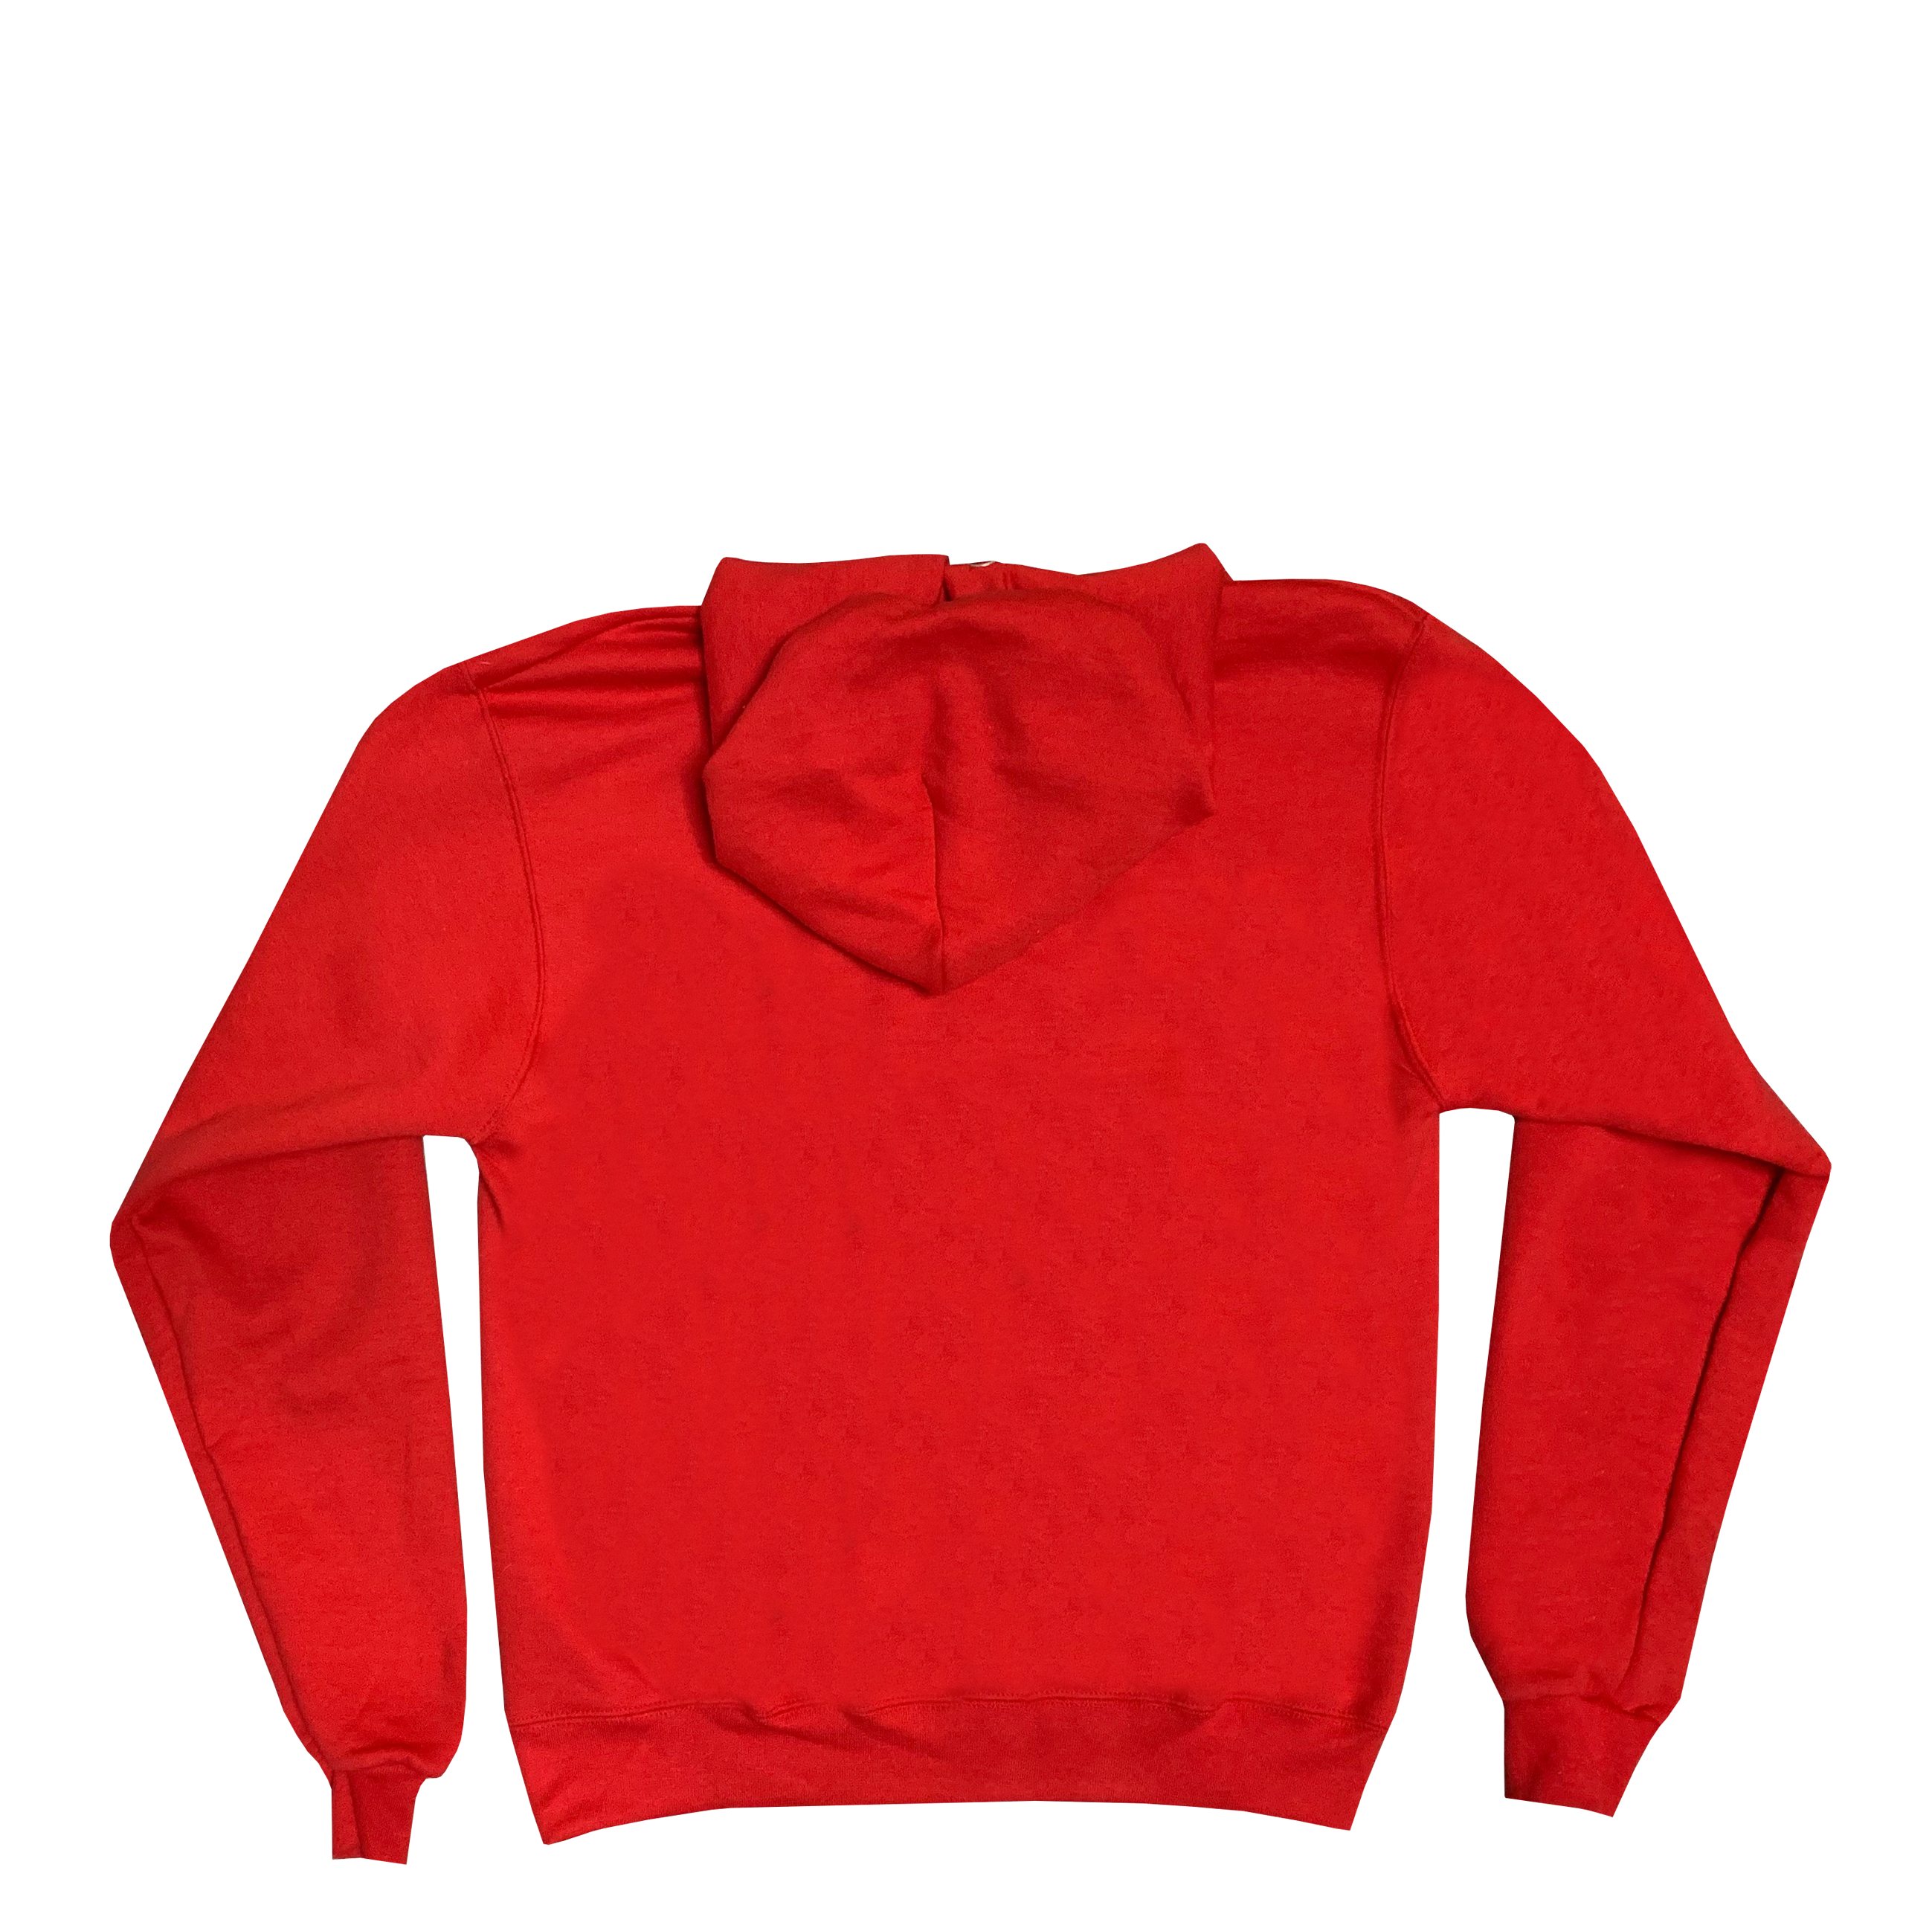 Fool’s Gold “Micro Logo” Champion Hoodie - Red